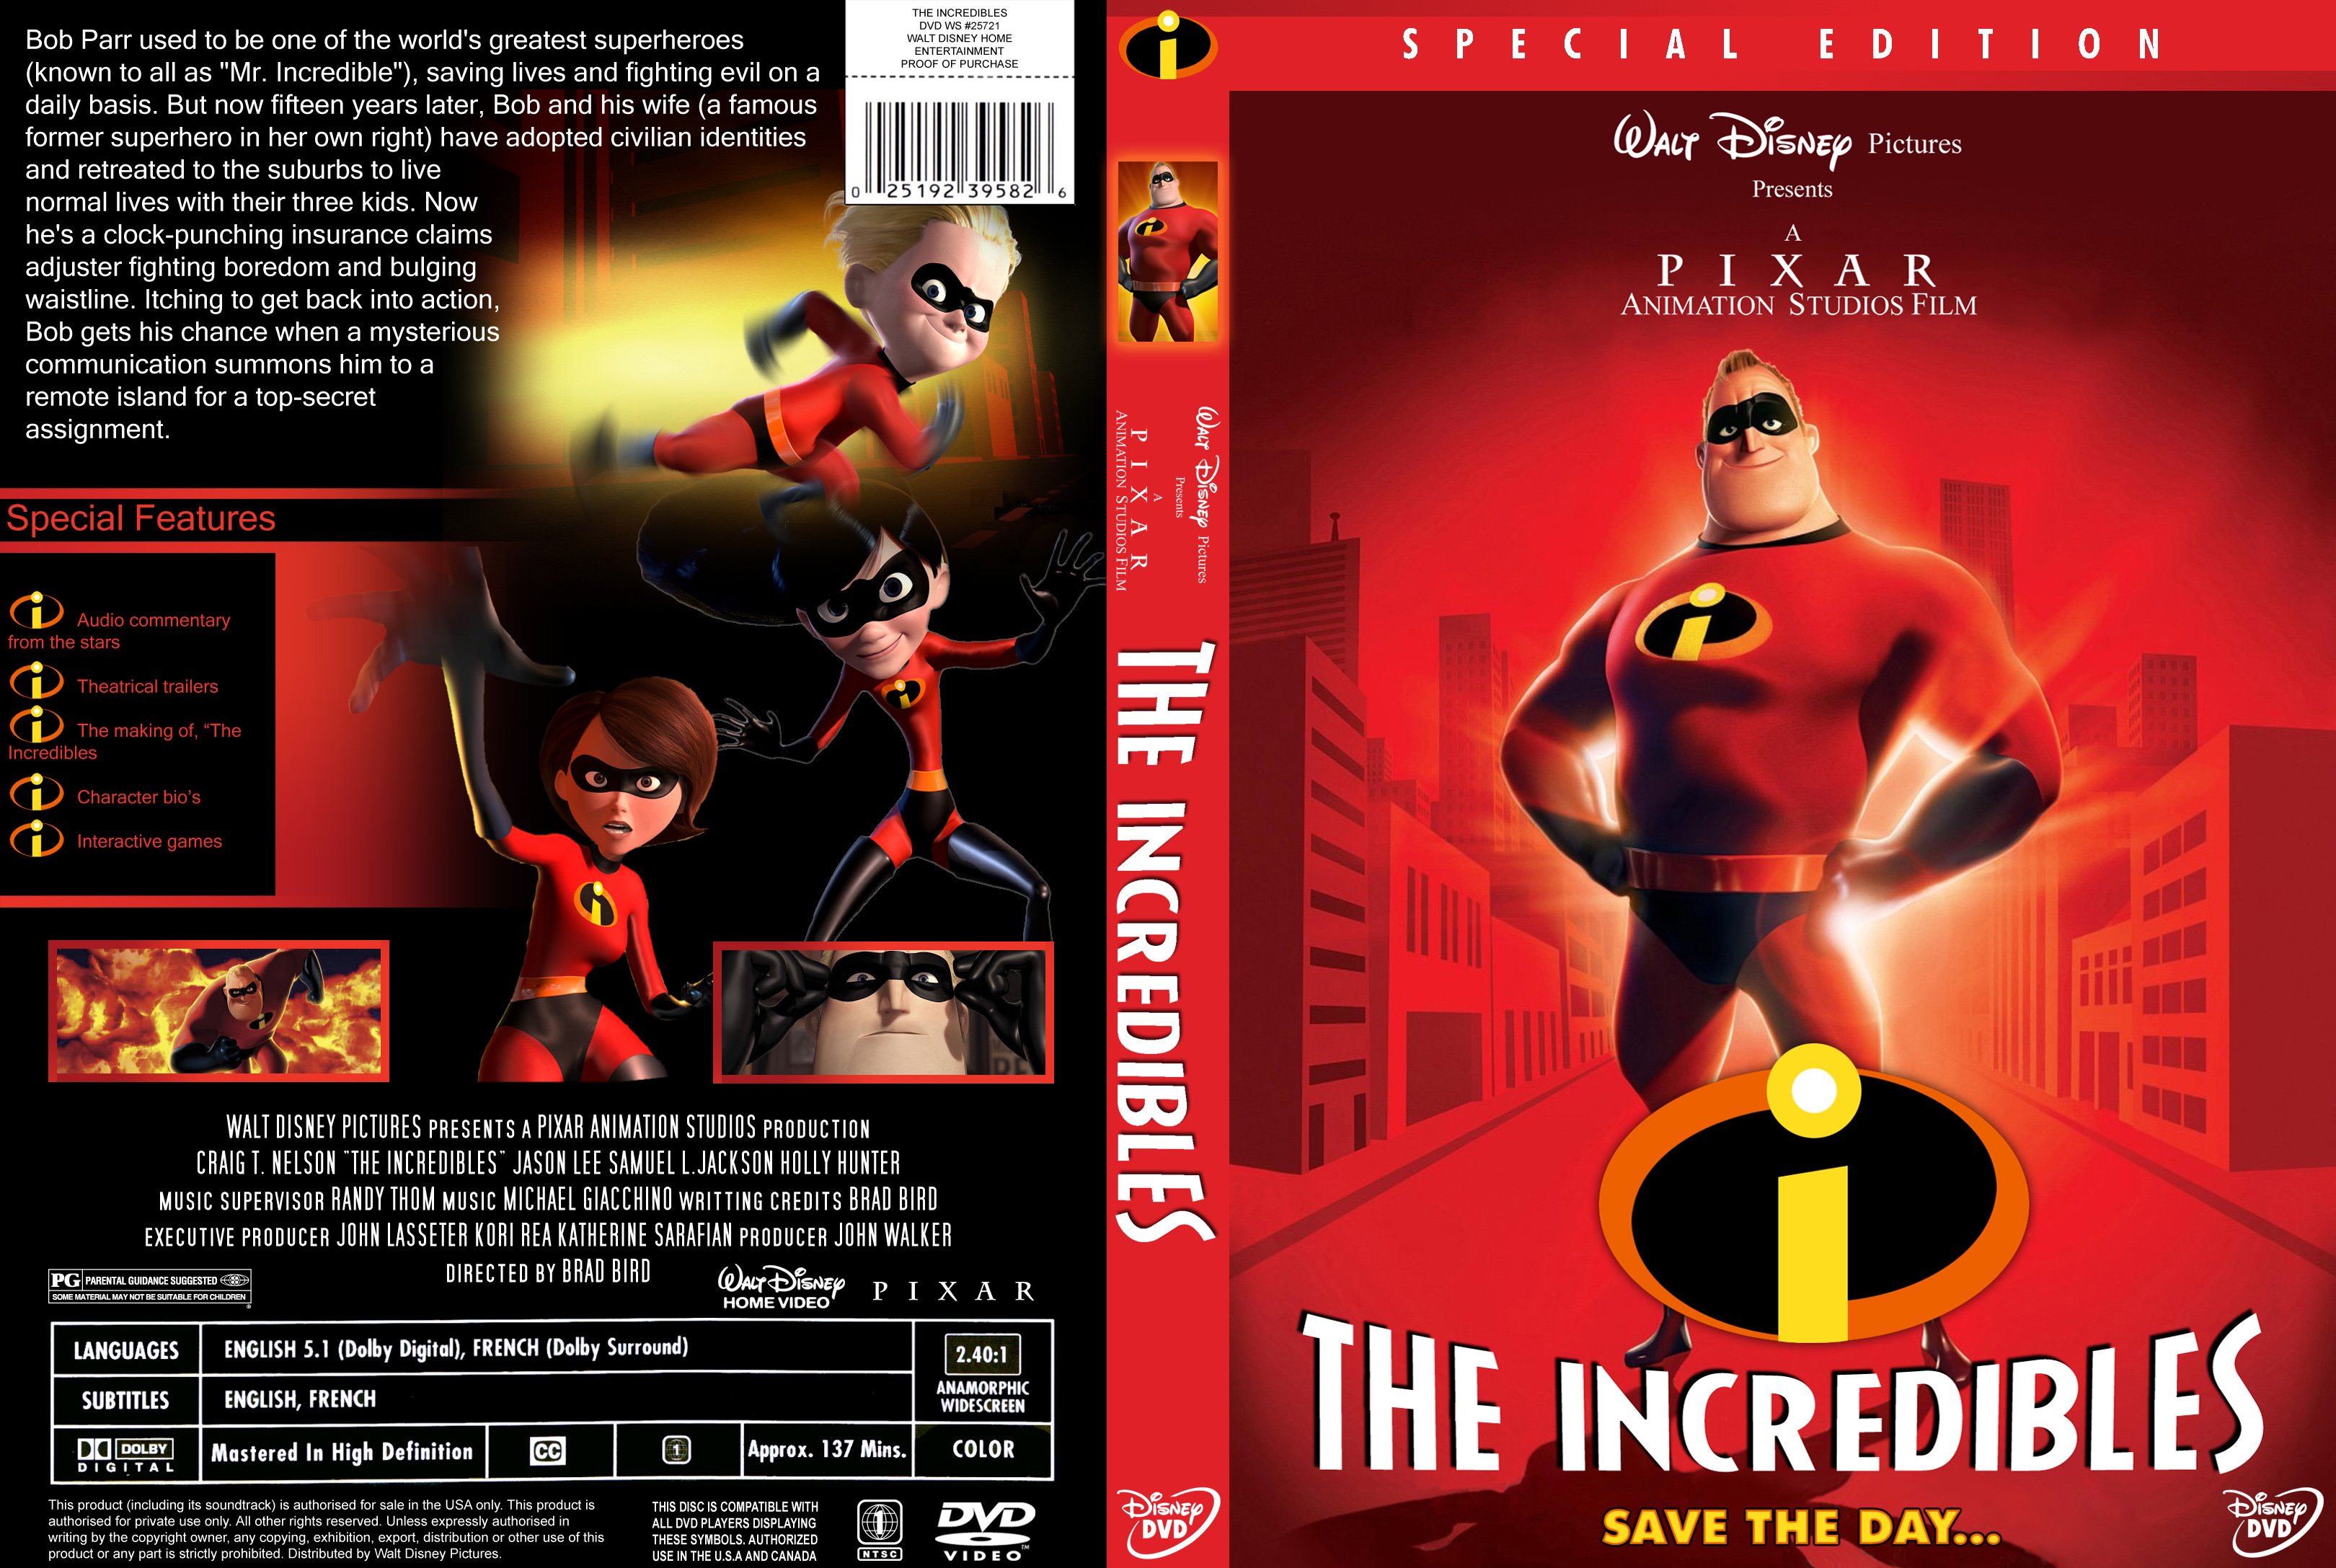 the incredibles full screen dvd cover